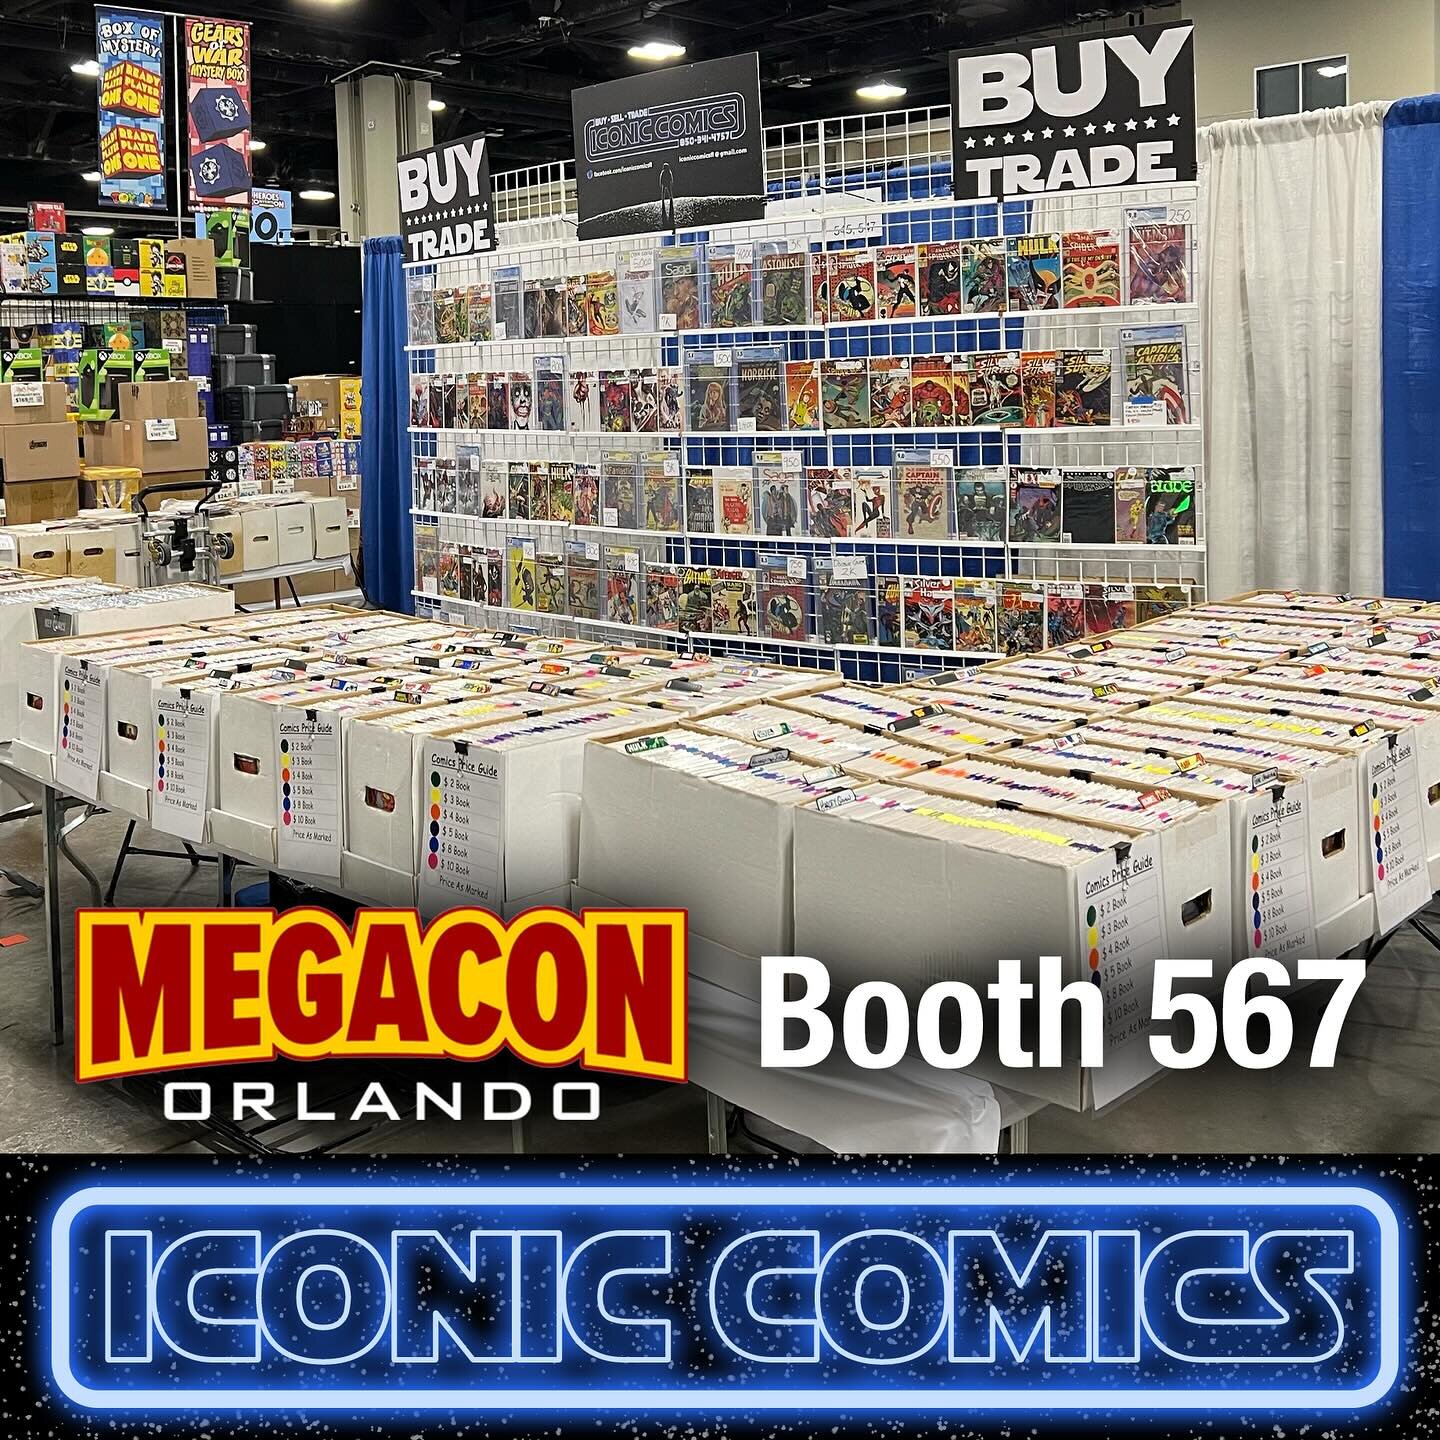 Check out our friends at Iconic Comics at #megaconorlando next weekend! They&rsquo;ll be set up all weekend so stop by and grab some great #comics

#megacon #comicbooks #comicon #orlando #comicsupplies